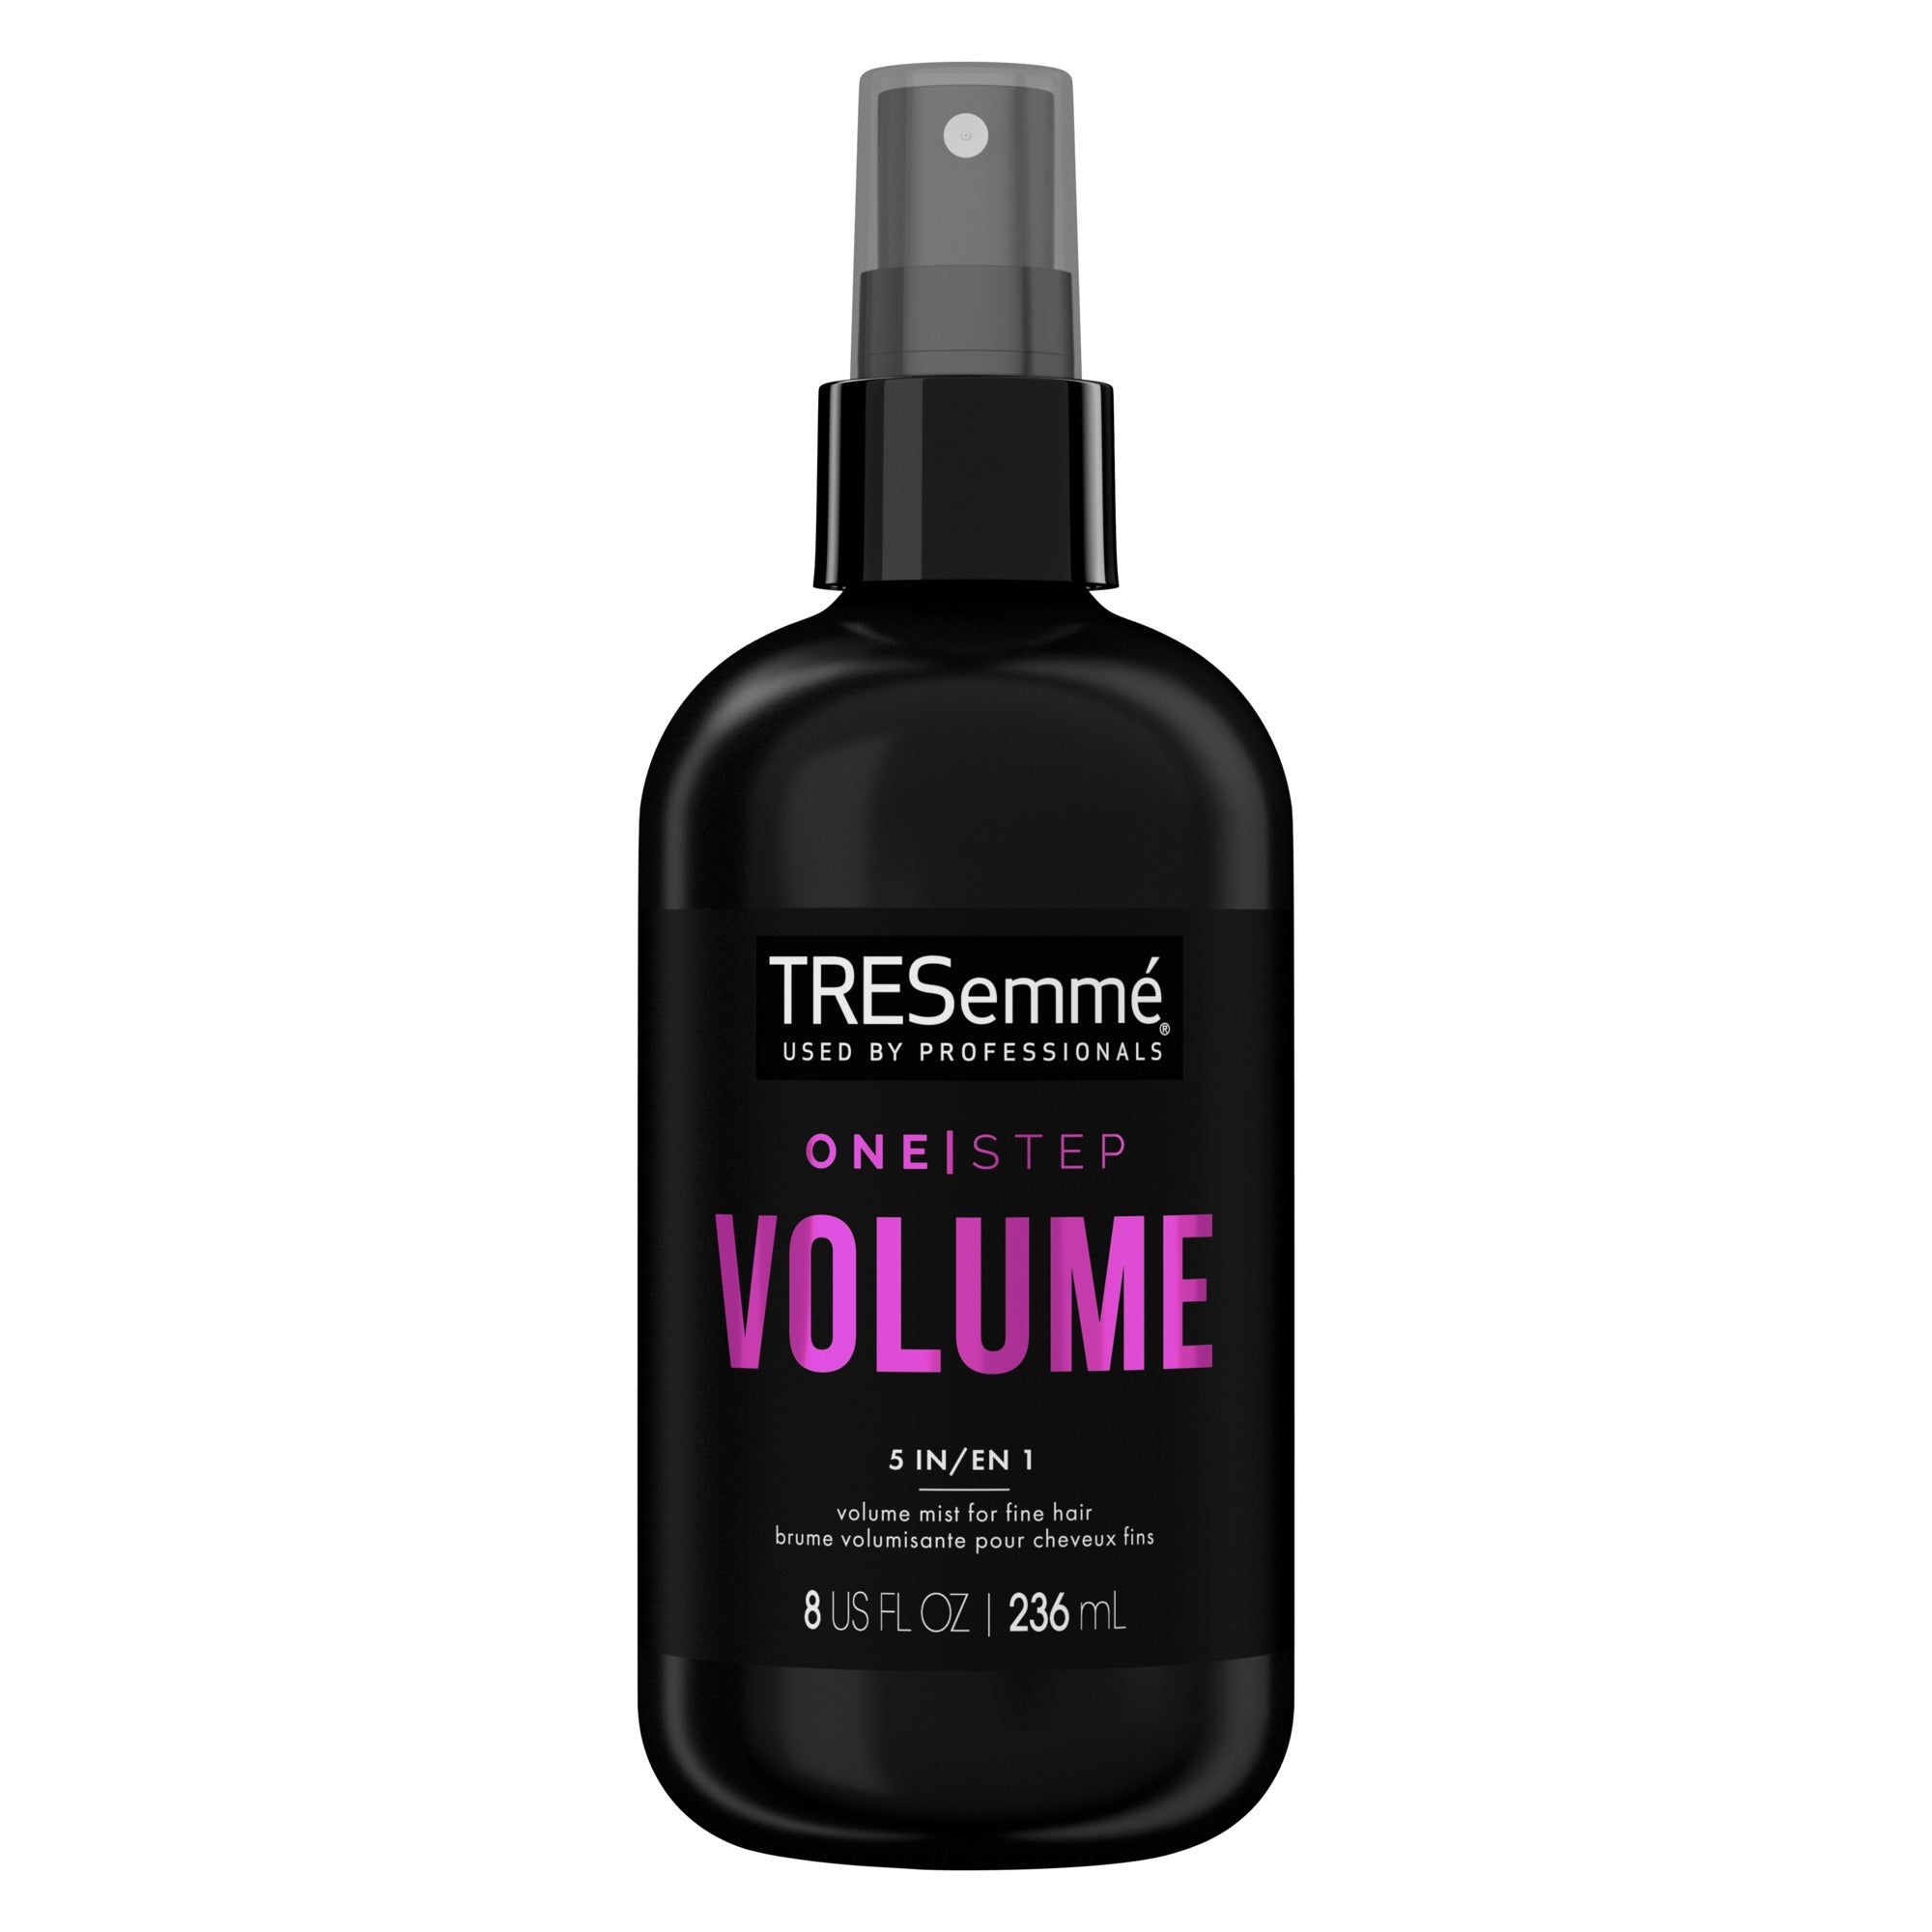 Showing the front angle view of the TRESemmé® ONE STEP Mist 5IN1 VOL 236mL product packaging.